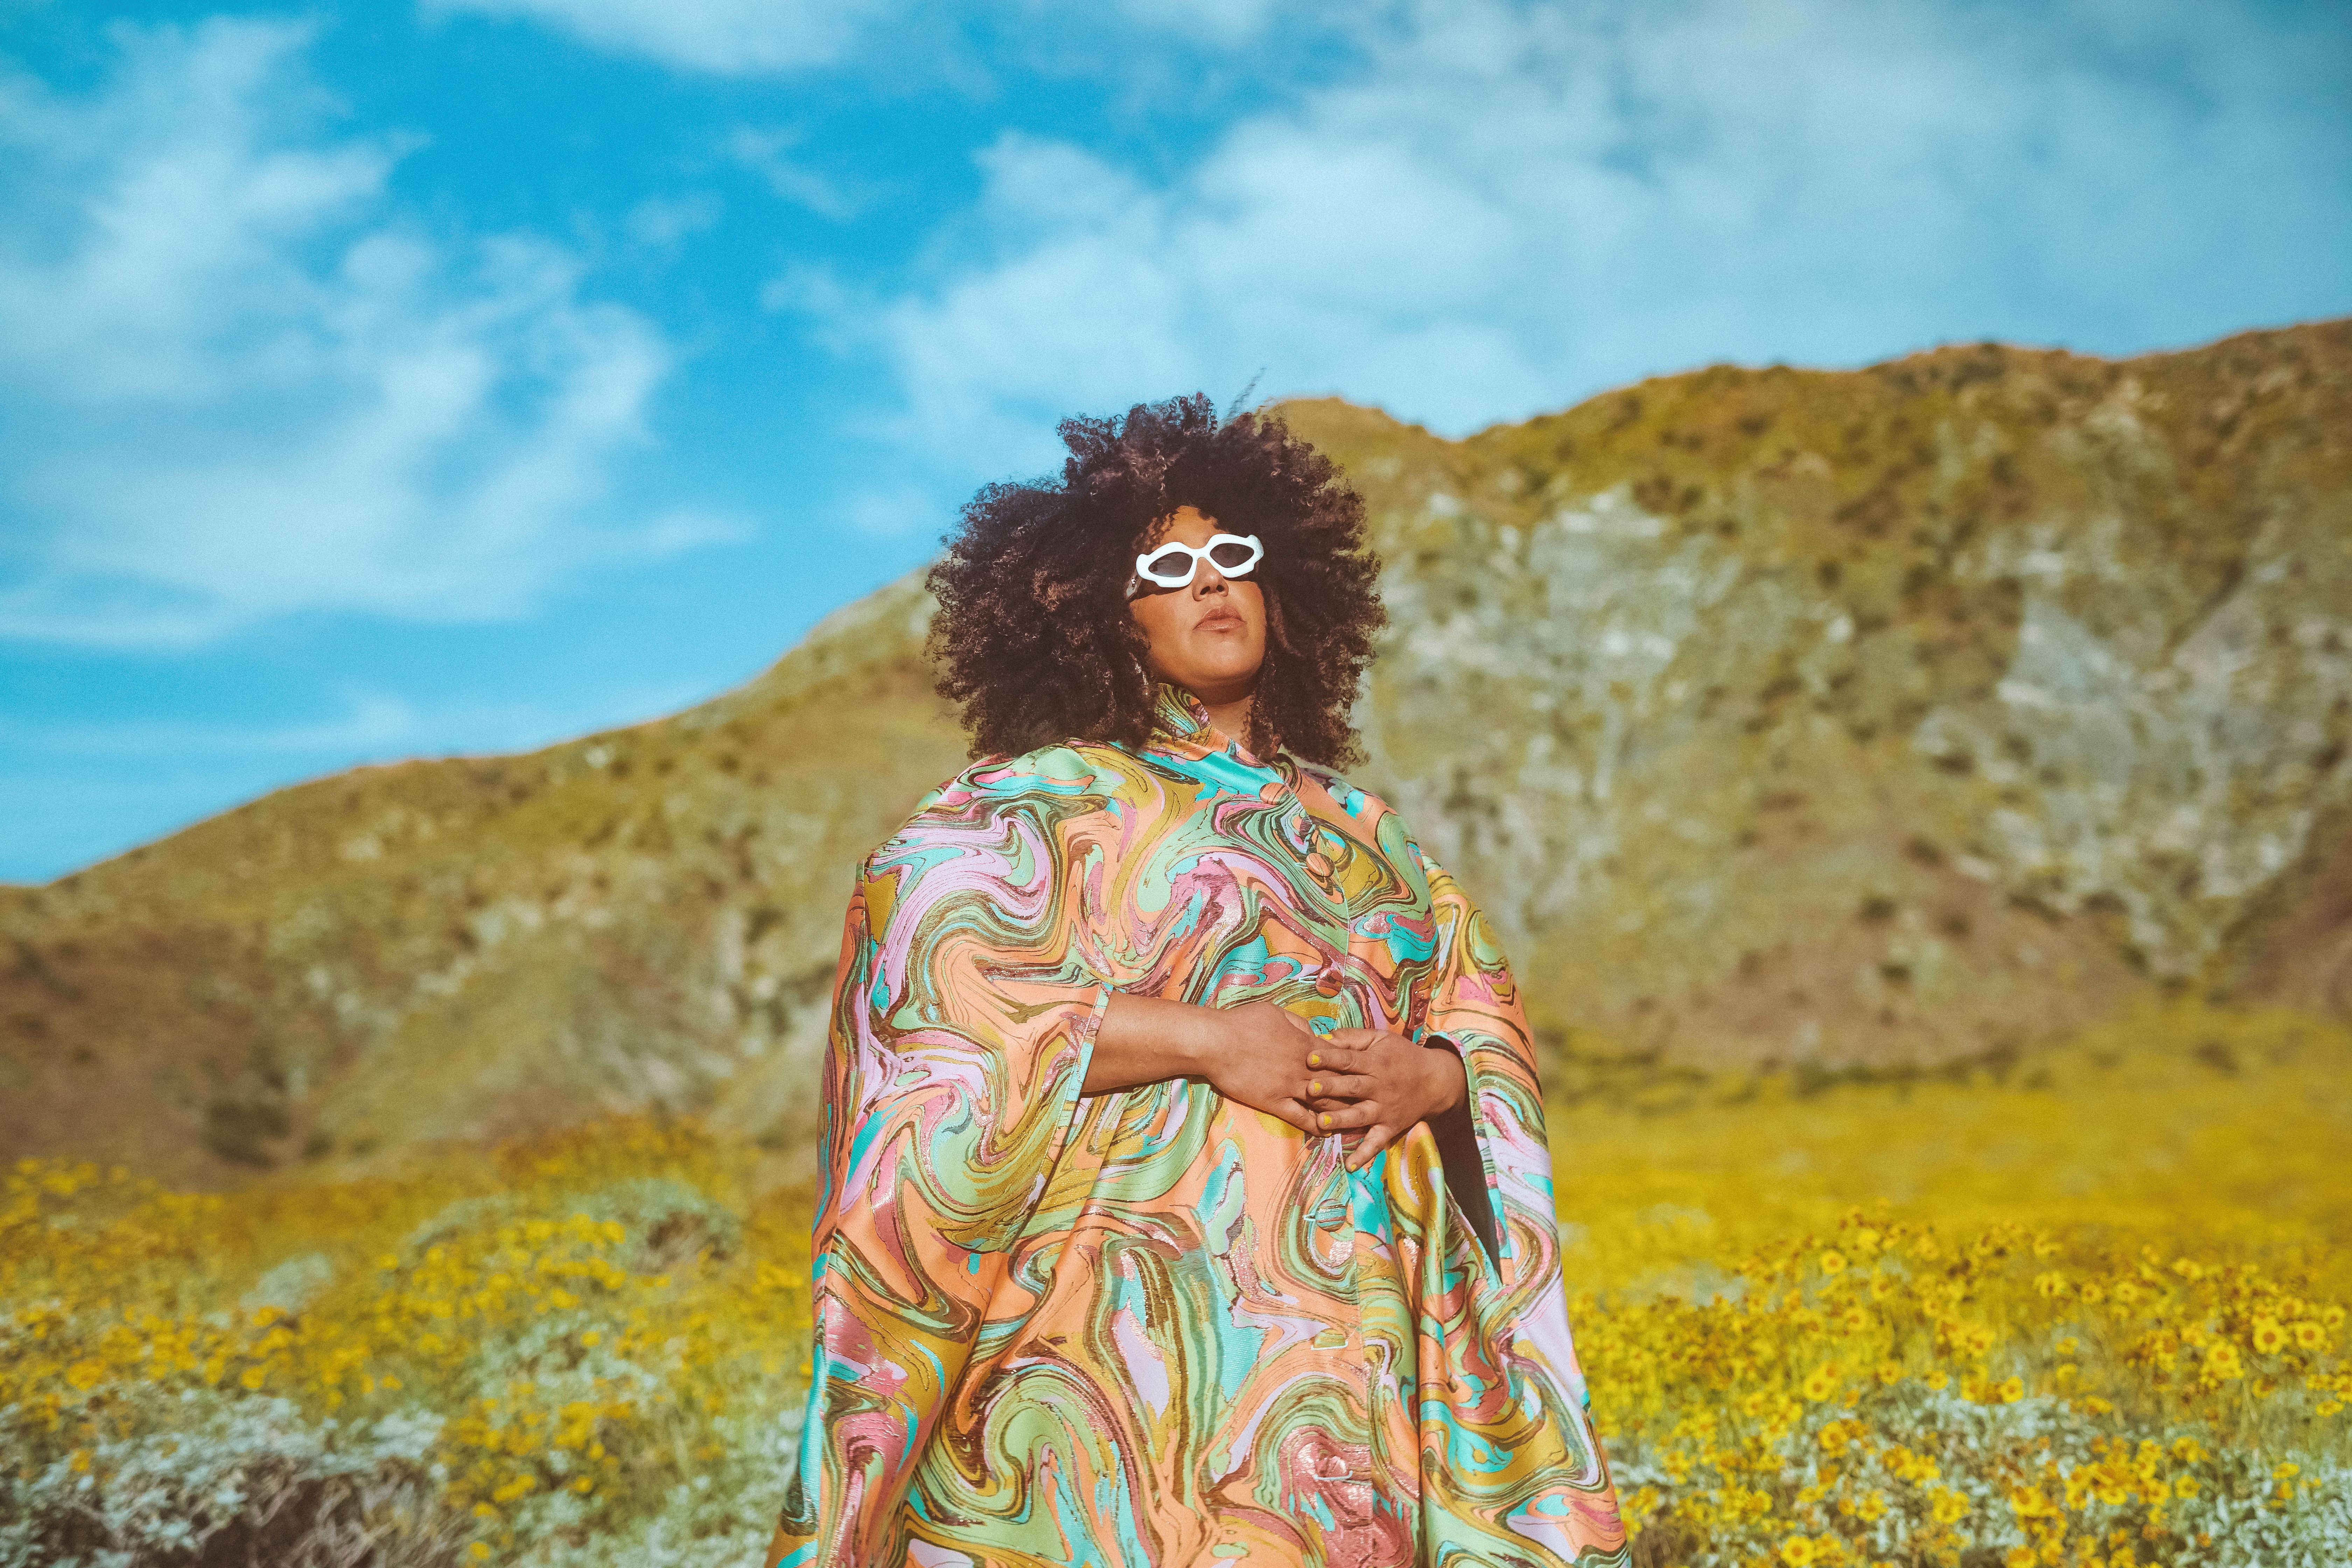 Brittany Howard in Manchester promo photo for Artist presale offer code